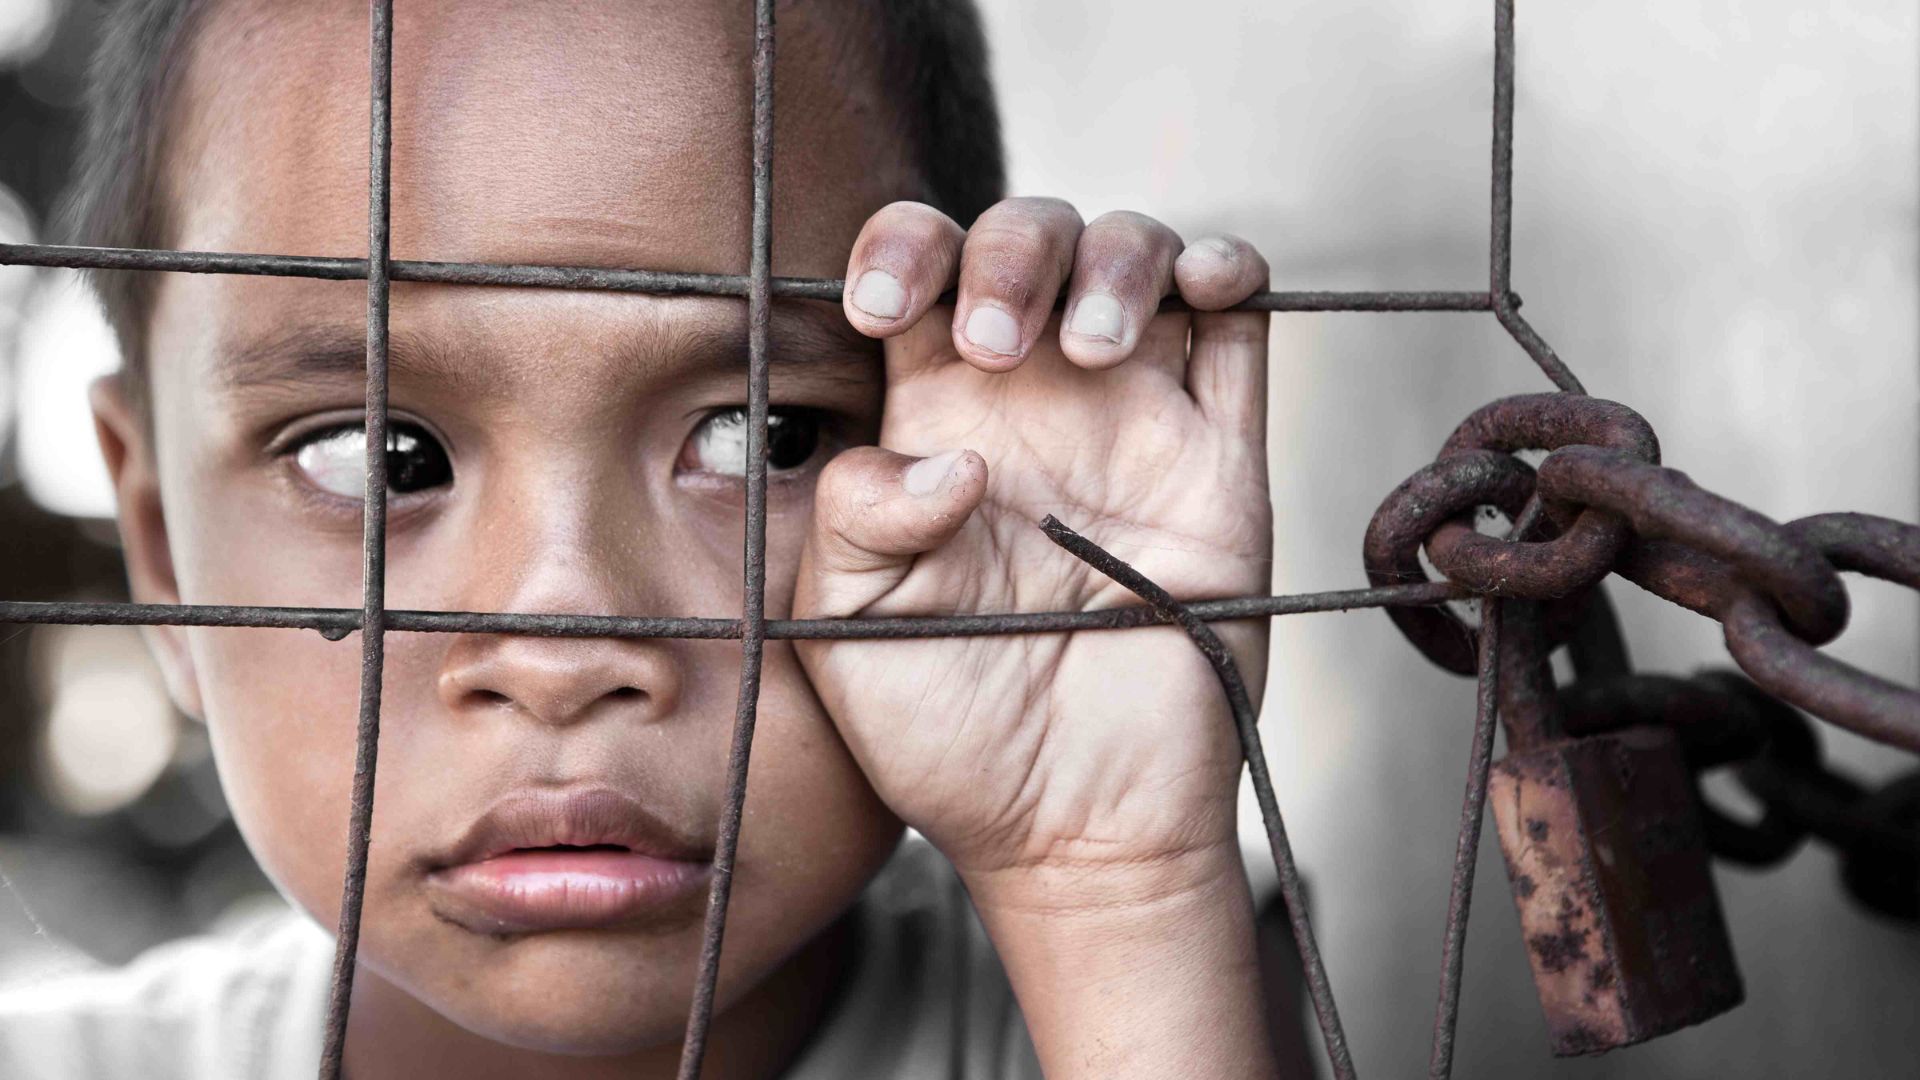 a small girl looking sad locked inside showing human trafficking